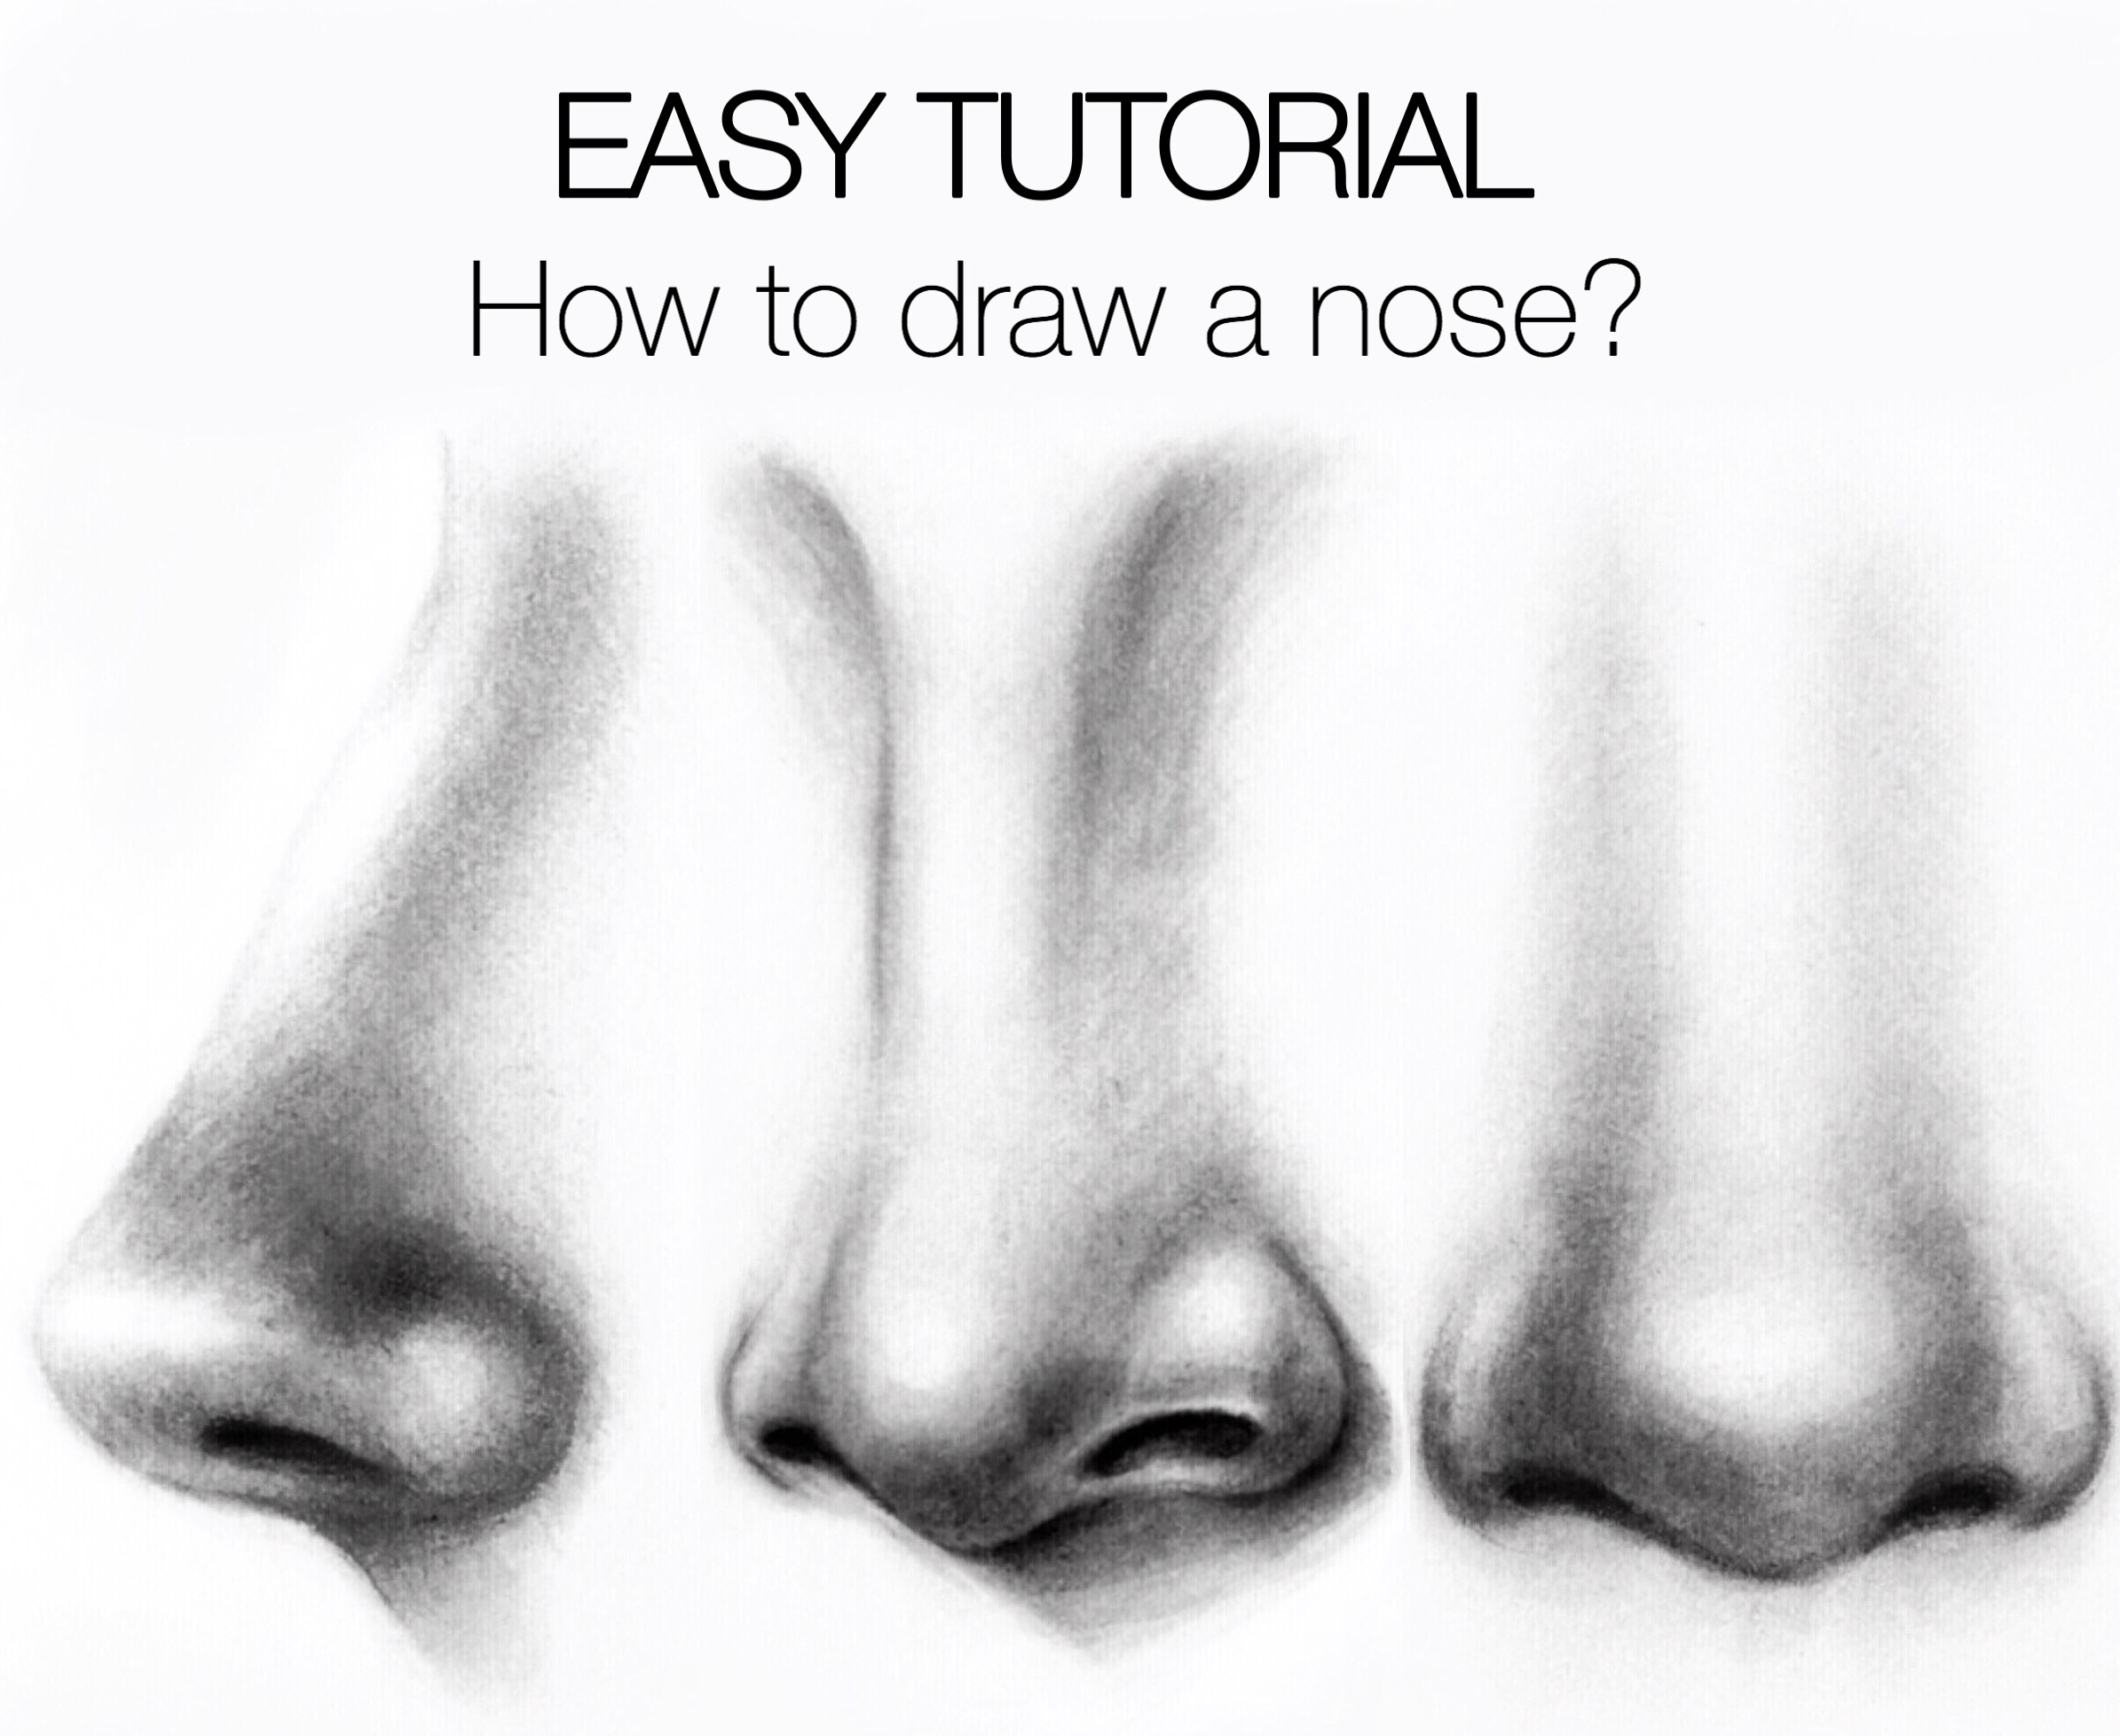 How to draw a nose - B+C Guides